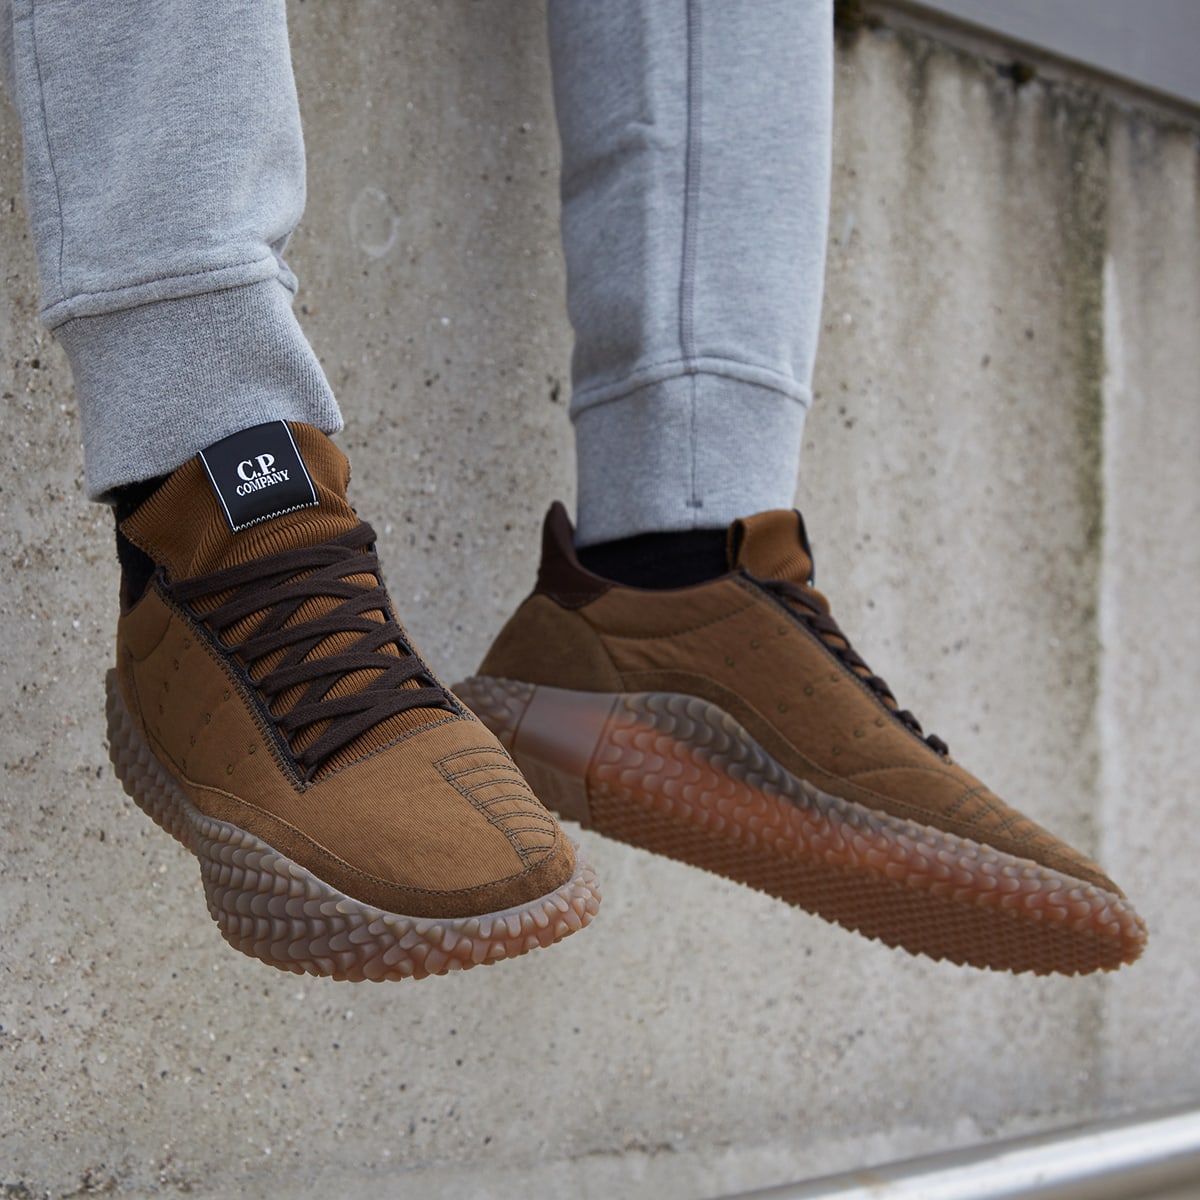 Adidas x CP Company Kamanda 'Made in (Olive & Gum) | END. Launches